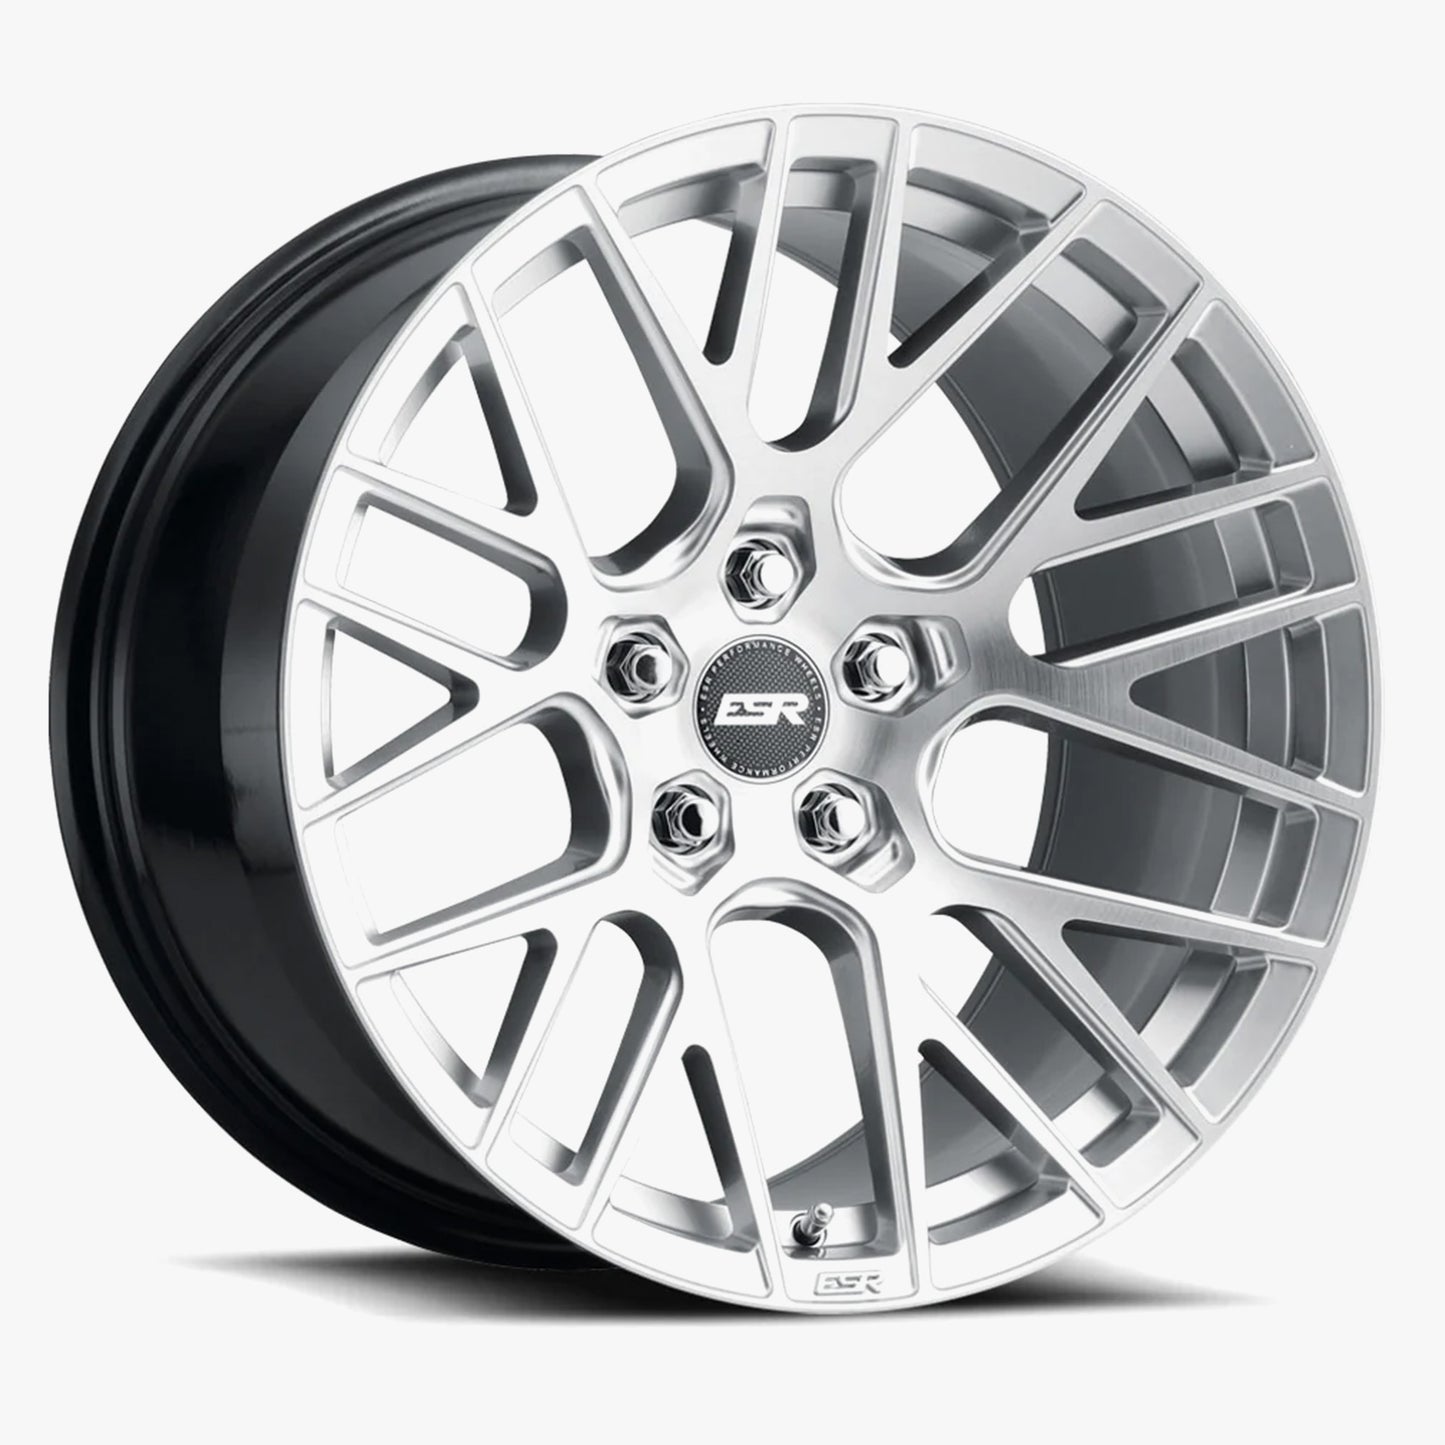 FORGETECH SERIES RF11 Brushed Hyper Silver Brushed Hyper Silver 20x10.5 +25 5x114.3